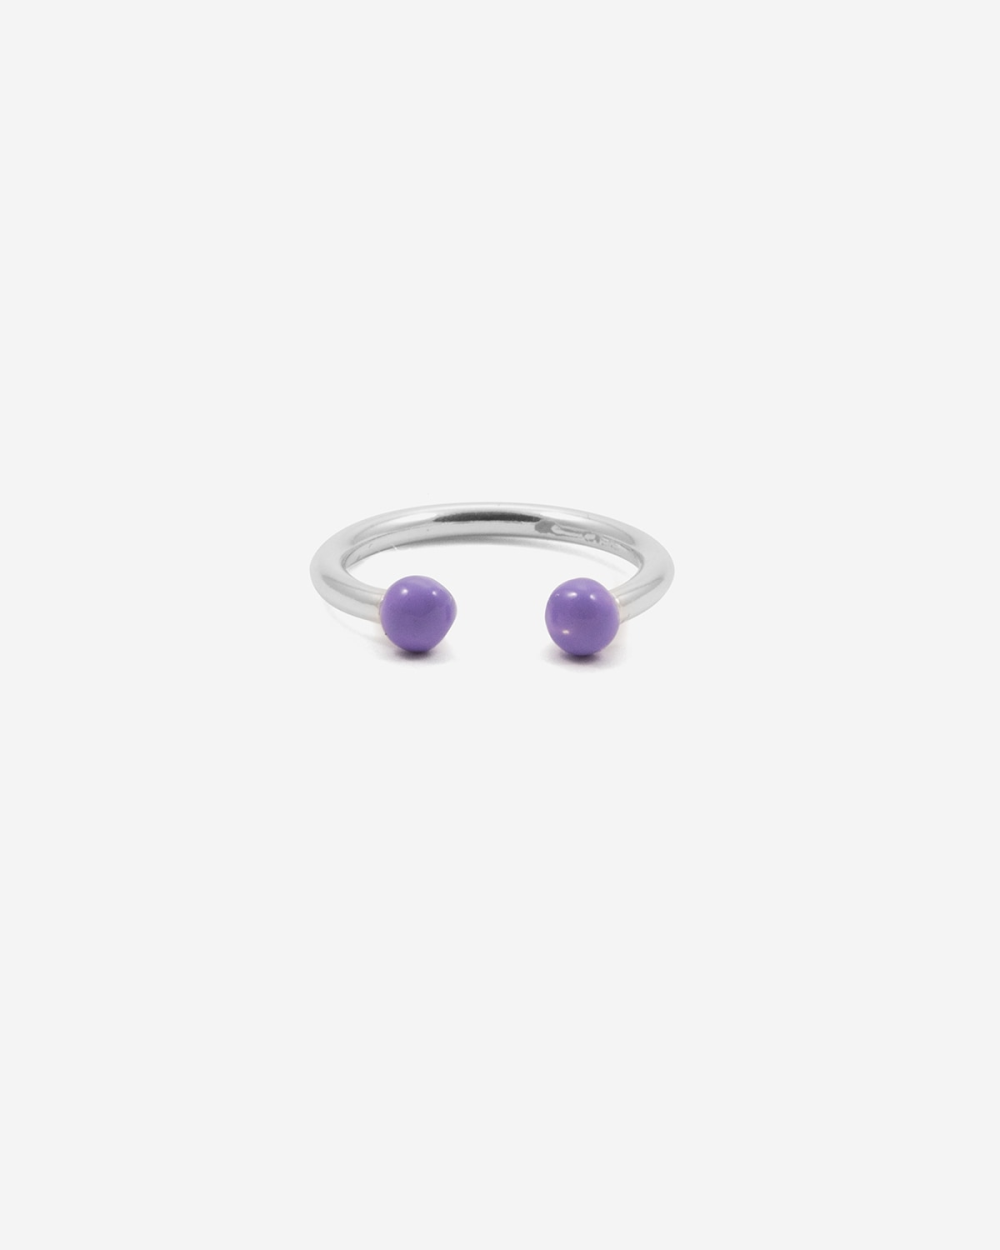 LARGE PIERCING RING WITH LILAC SPHERES